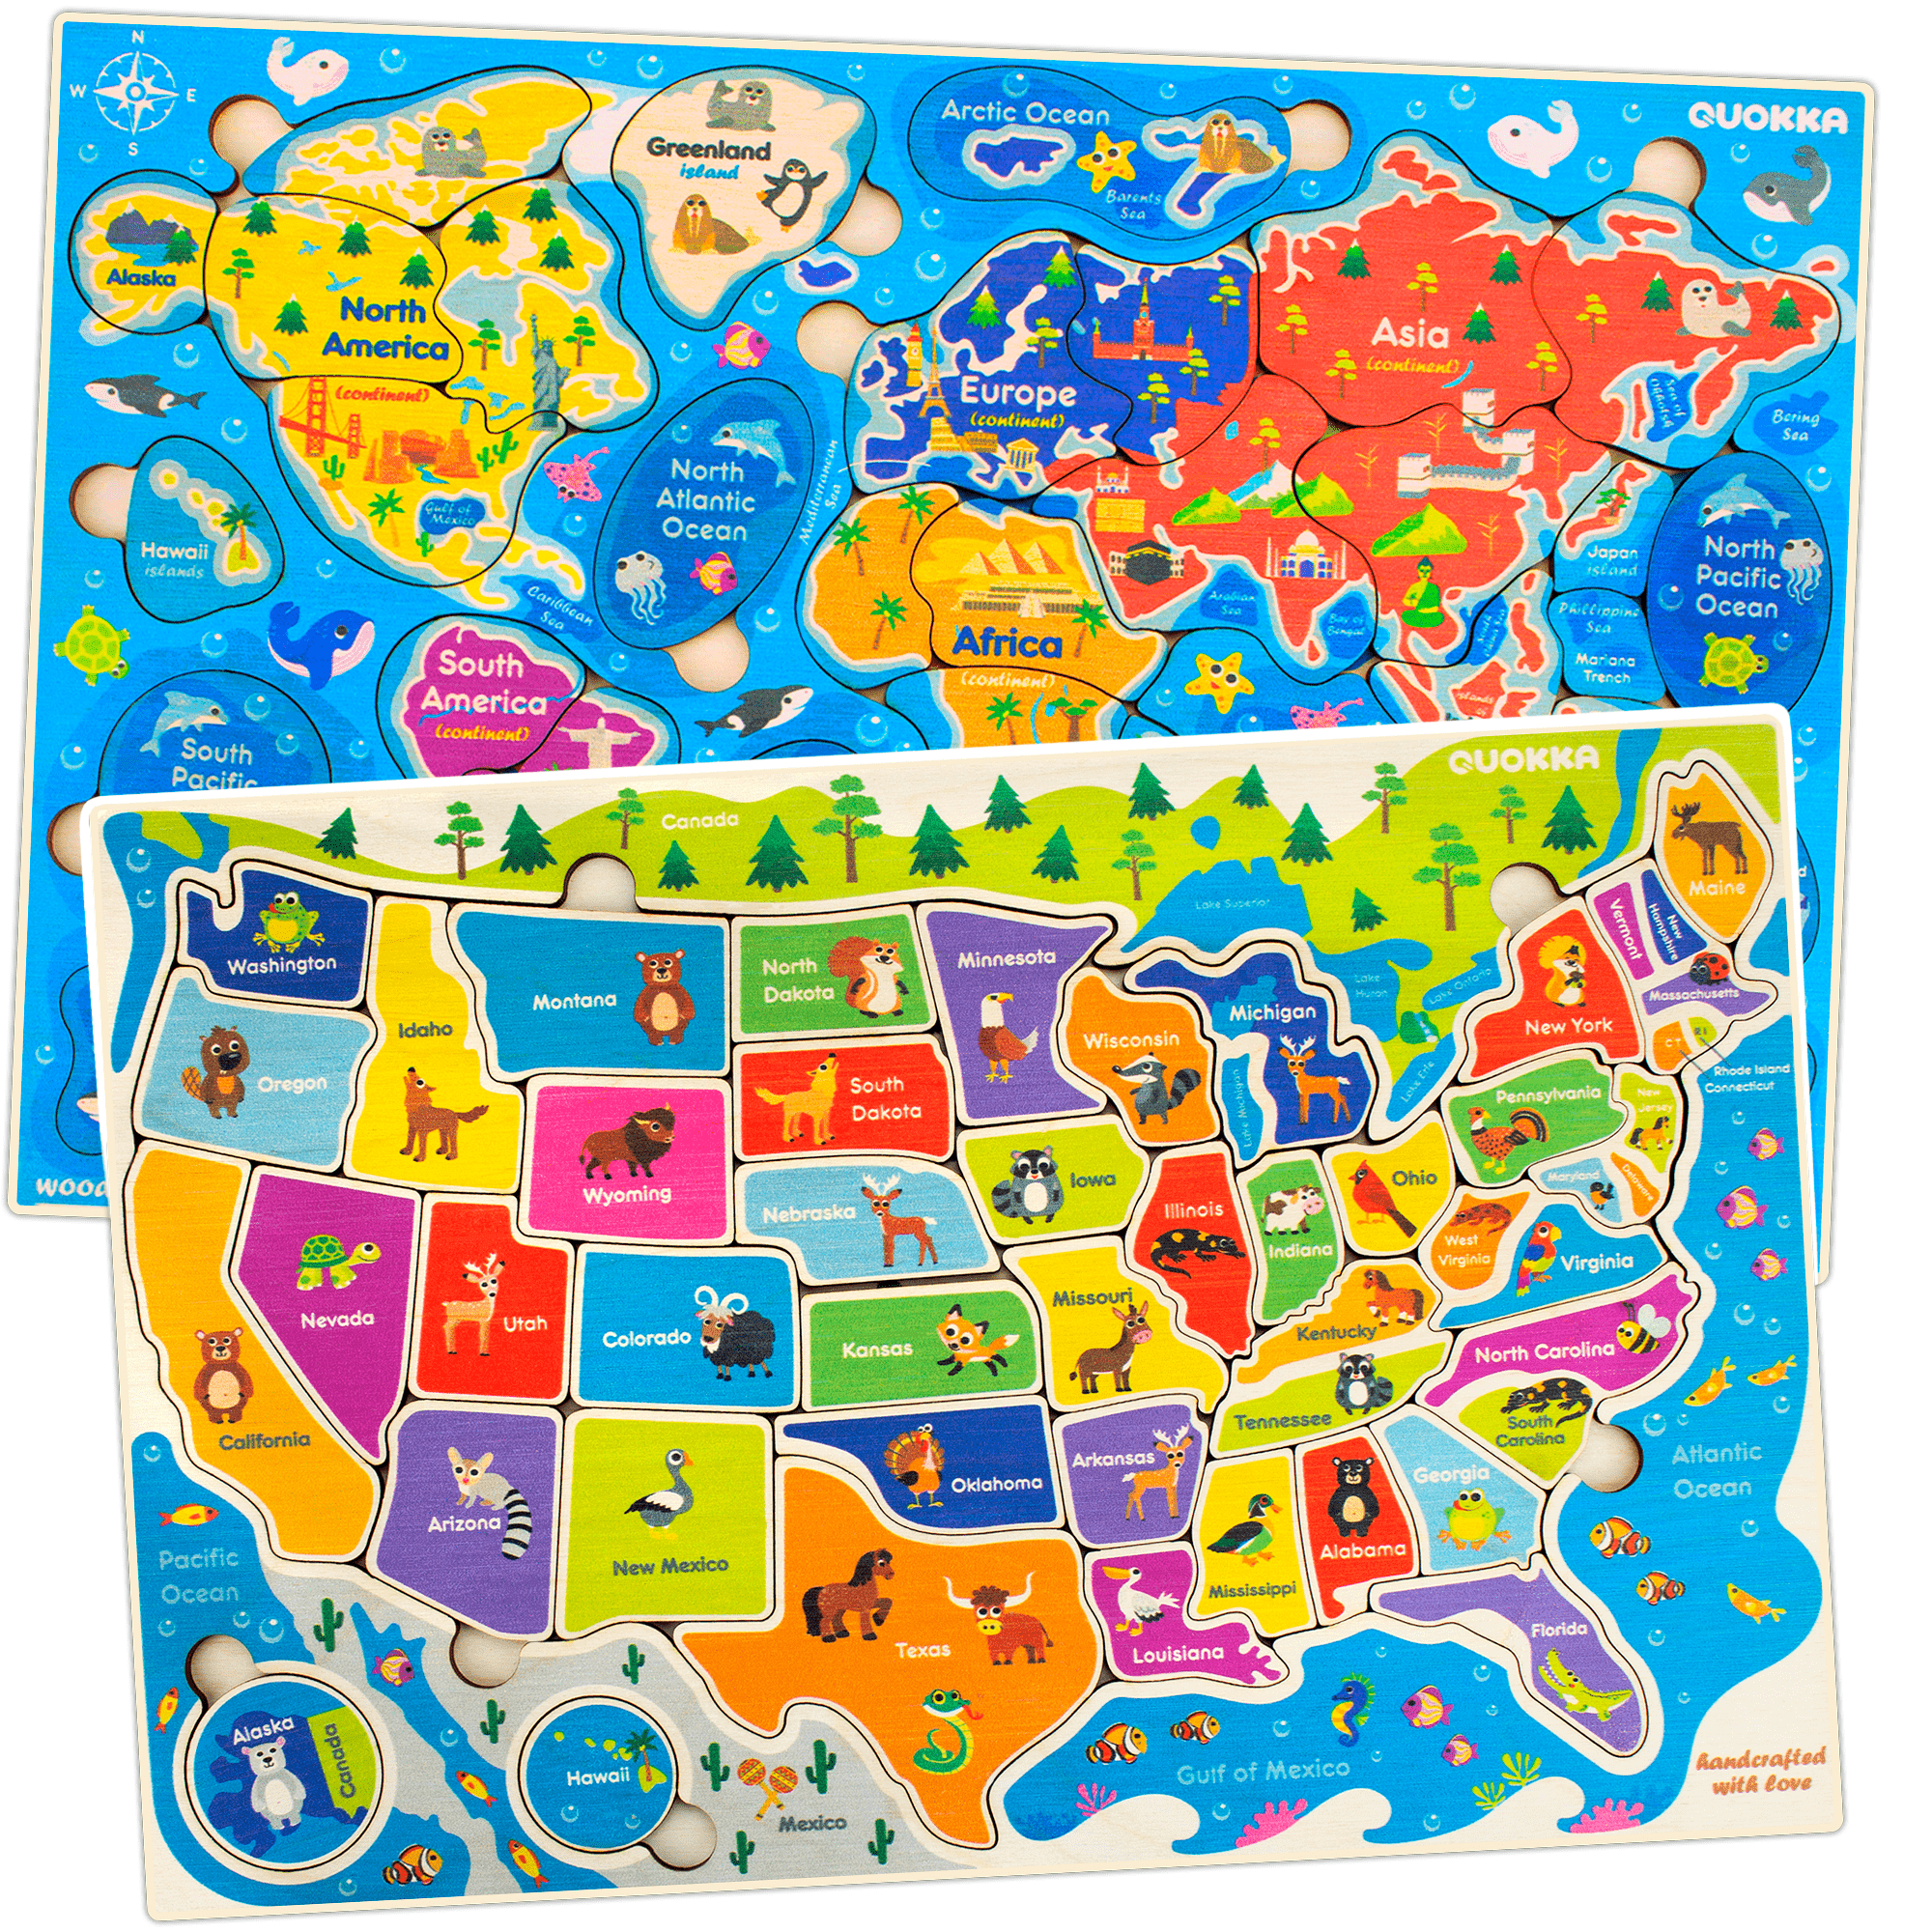 1000 Pieces Wooden Jigsaw Puzzle Premium World Map Educational Adults Kids Toy